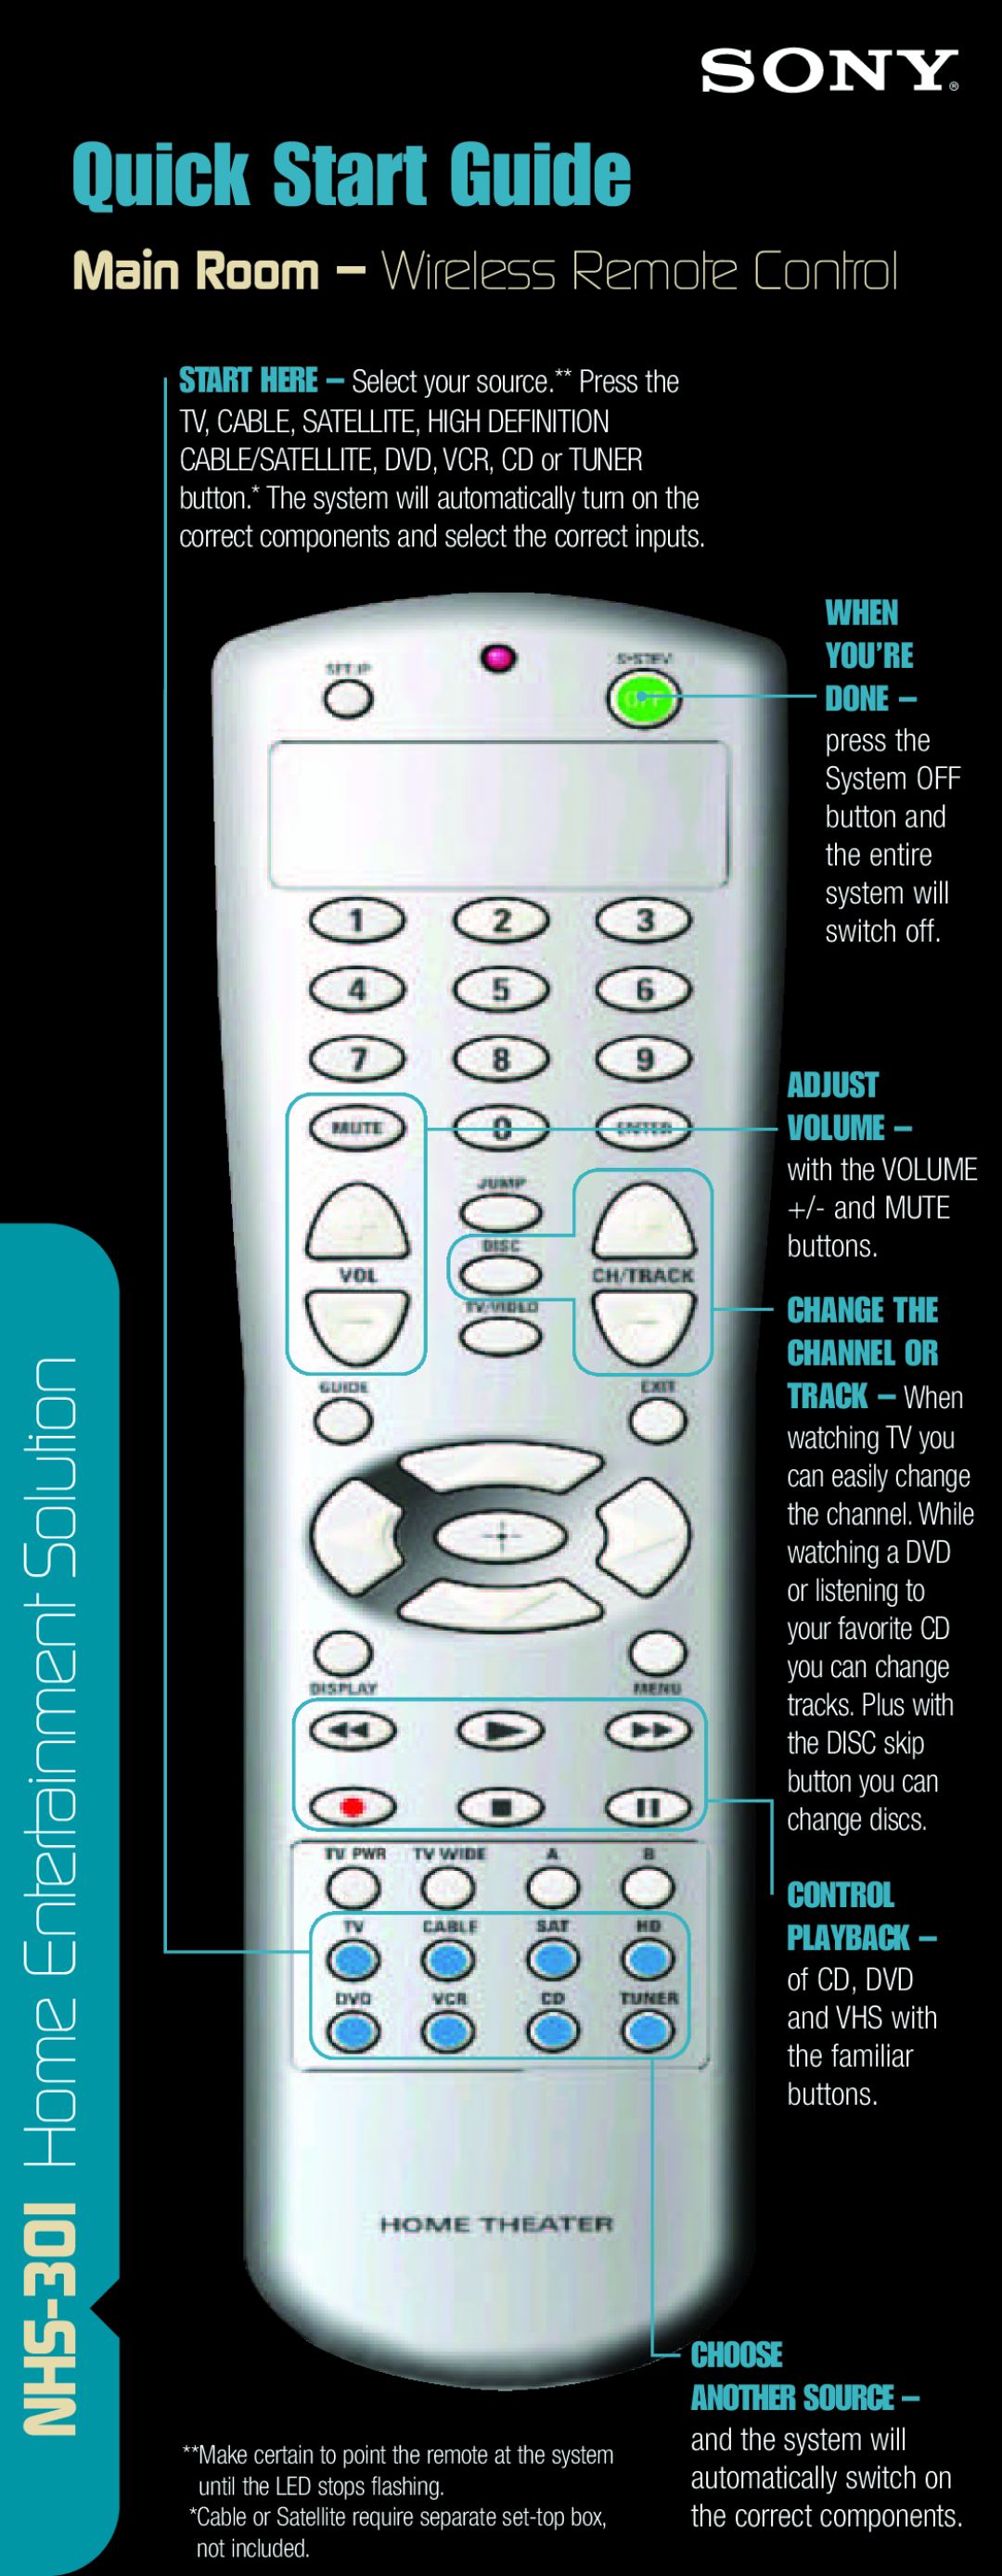 Sony quick start Quick Start Guide, NHS-301 Home Entertainment Solution, When You’Re Done, Adjust Volume 